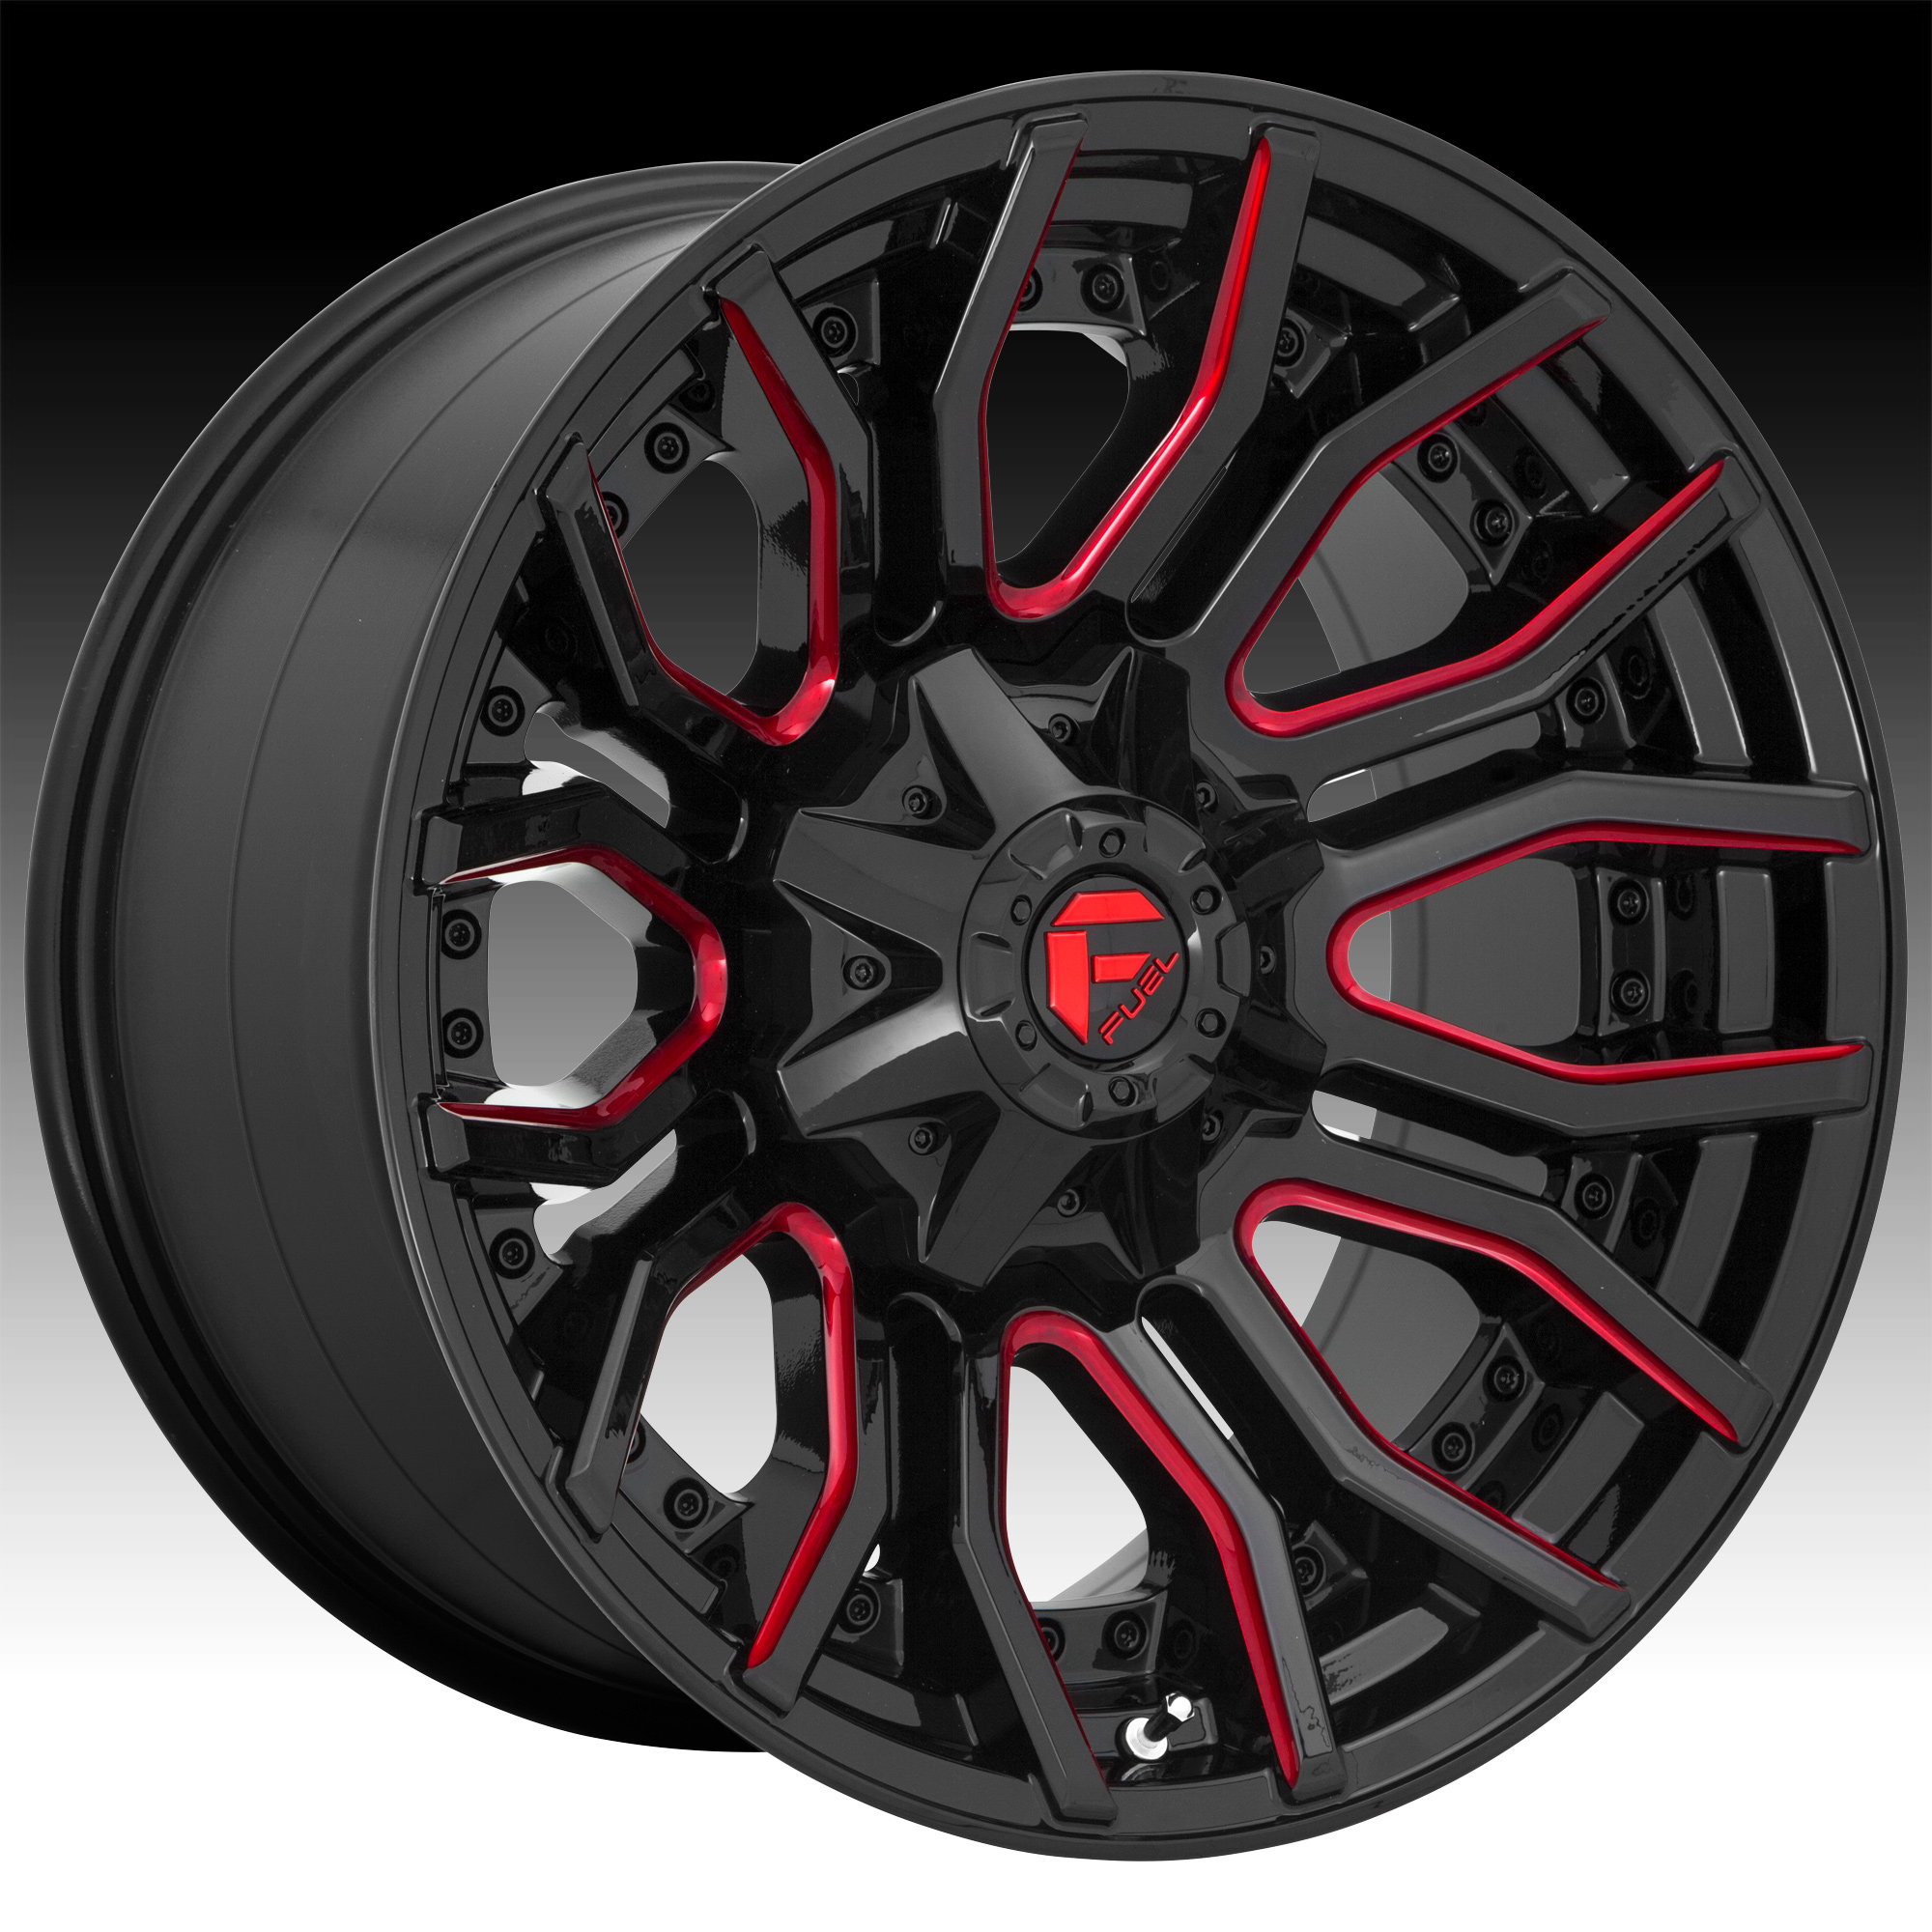 Fuel Rage D712 Gloss Black Milled Red Tint Custom Rims - D712 / Rage - Fuel - 1PC - Wheels for Trucks, Jeeps, SUVs and Passenger